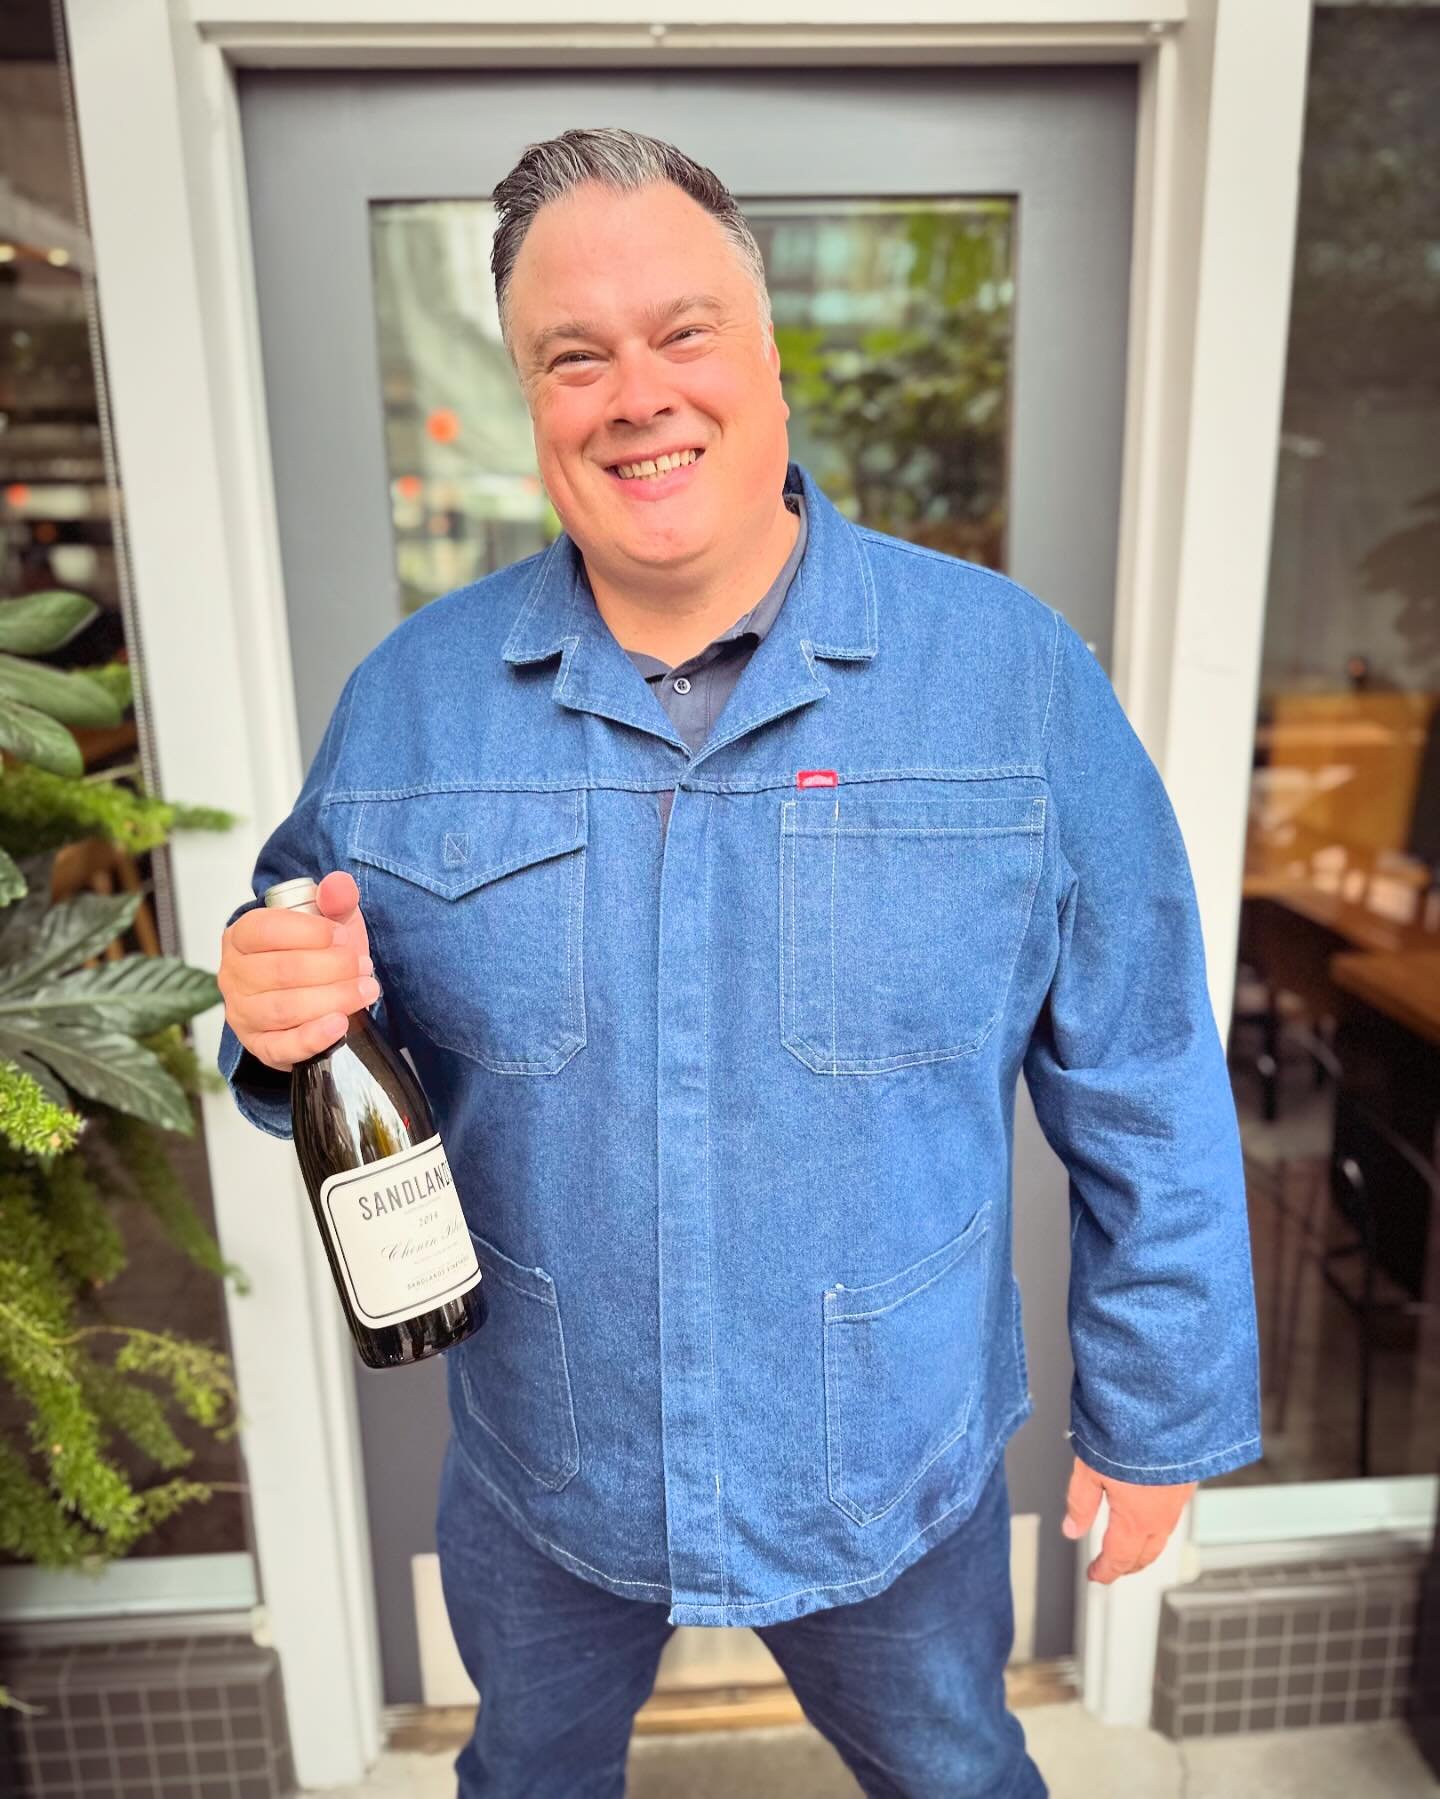 @ownrooted from @sandlandsvineyards is here! He&rsquo;s sharing his current releases,&hellip;.PLUS a fun bonus wine = 2014 Chenin! First come, first serve!

#cadetbar #downtownnapa #napavalley #napa #visitnapa #winebar #winemakerwednesday #sandlands 